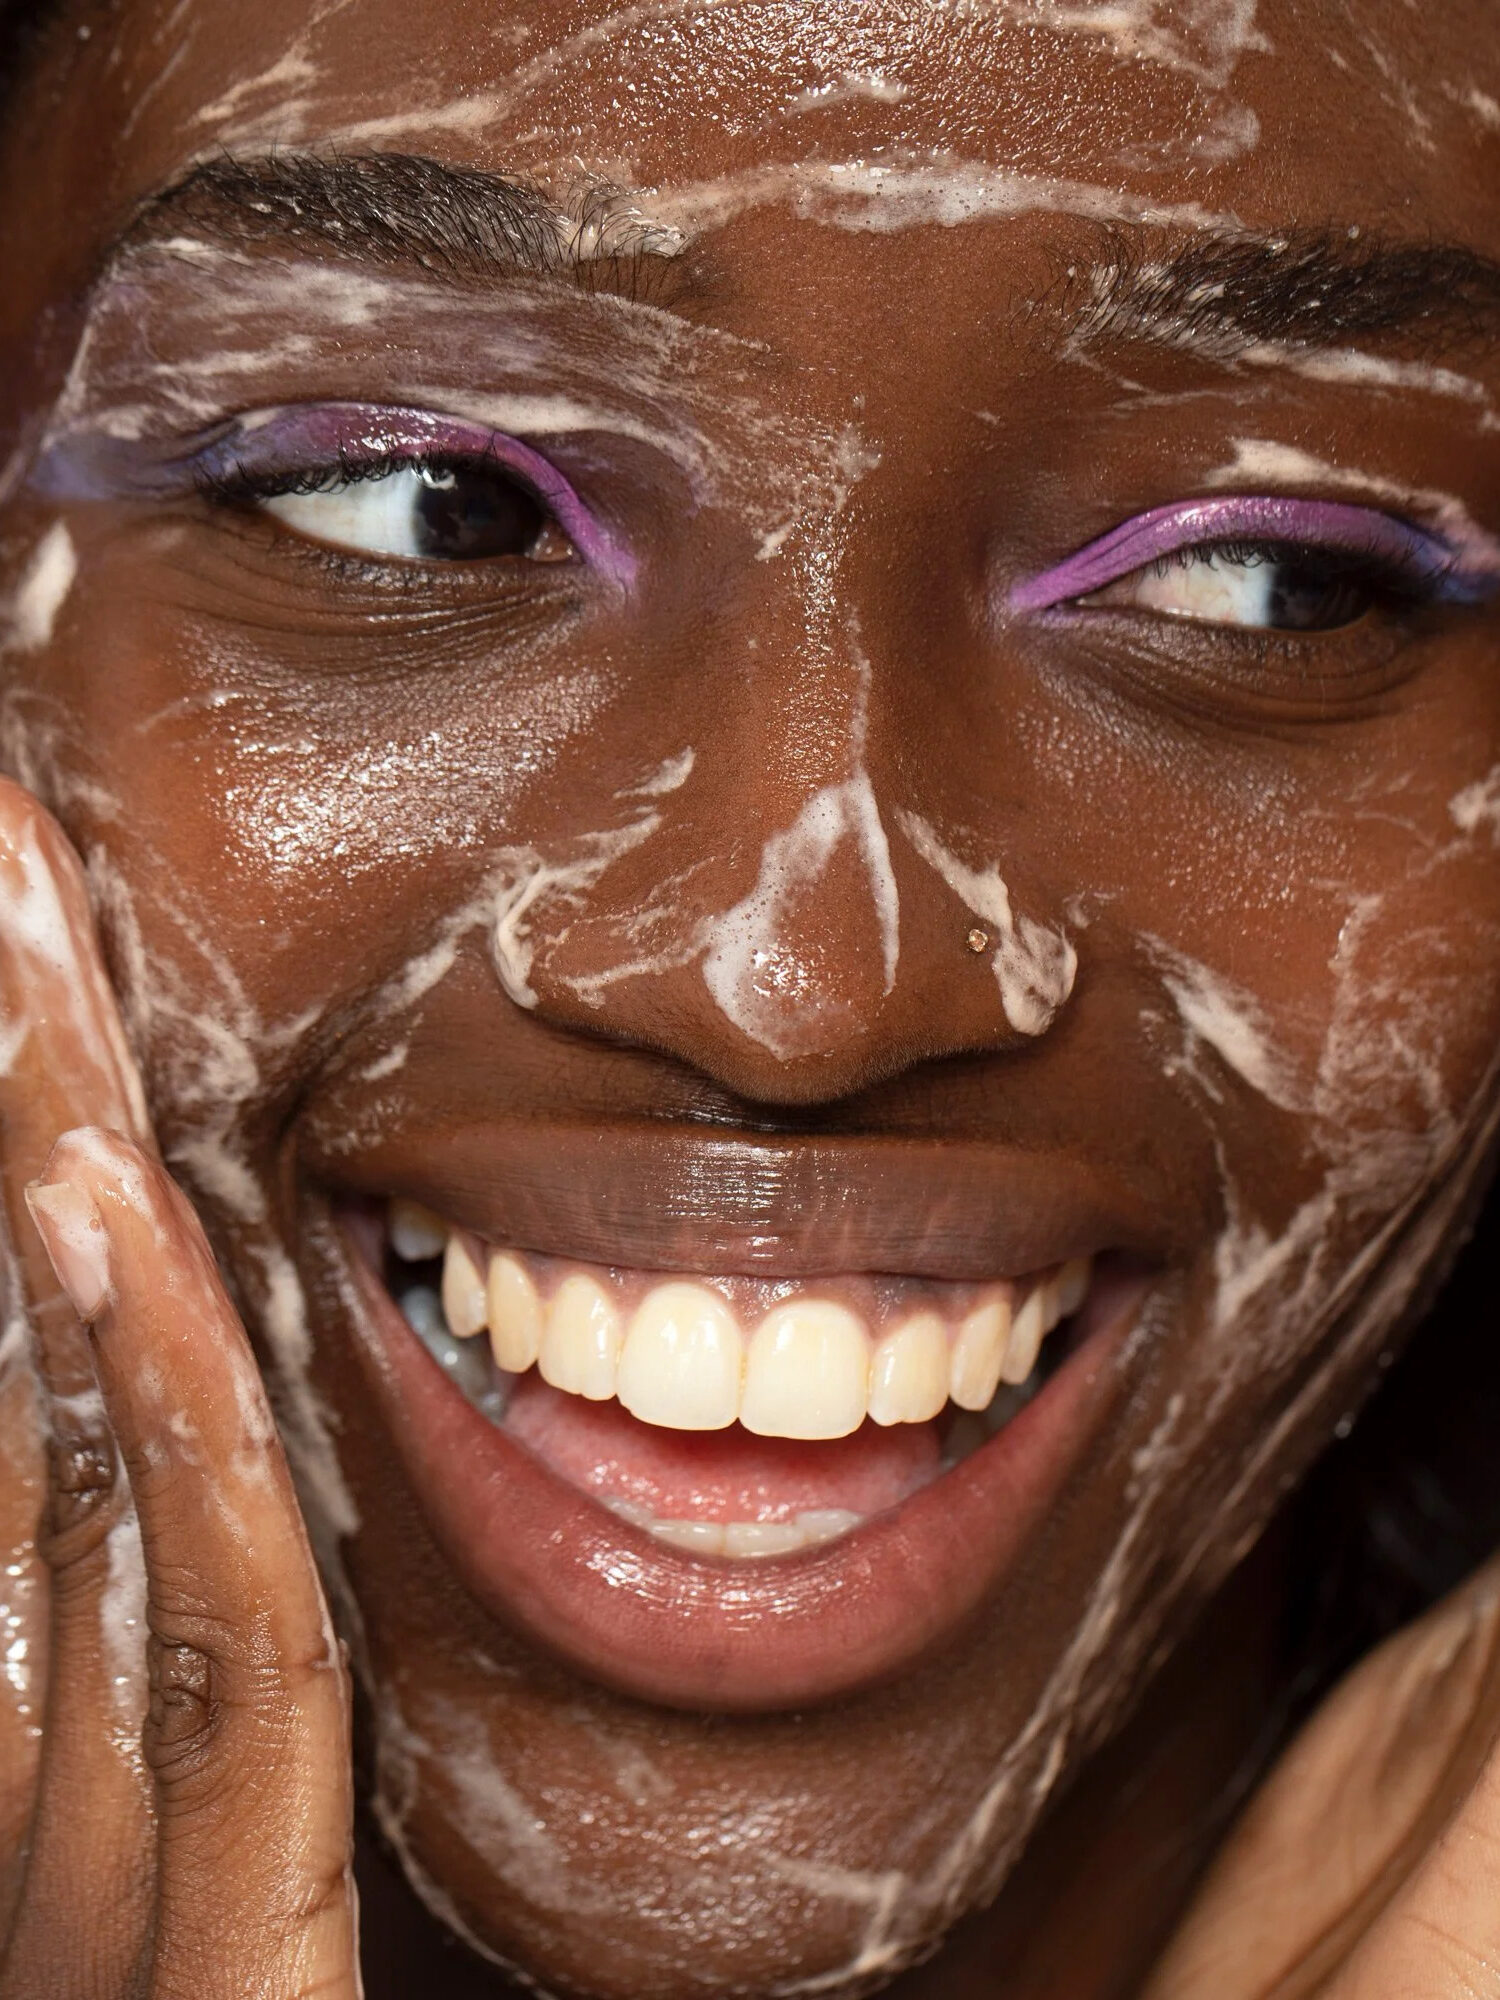 A woman with pink and purple eyeshadow applying a Herbivore cleansing product to her face while smiling.